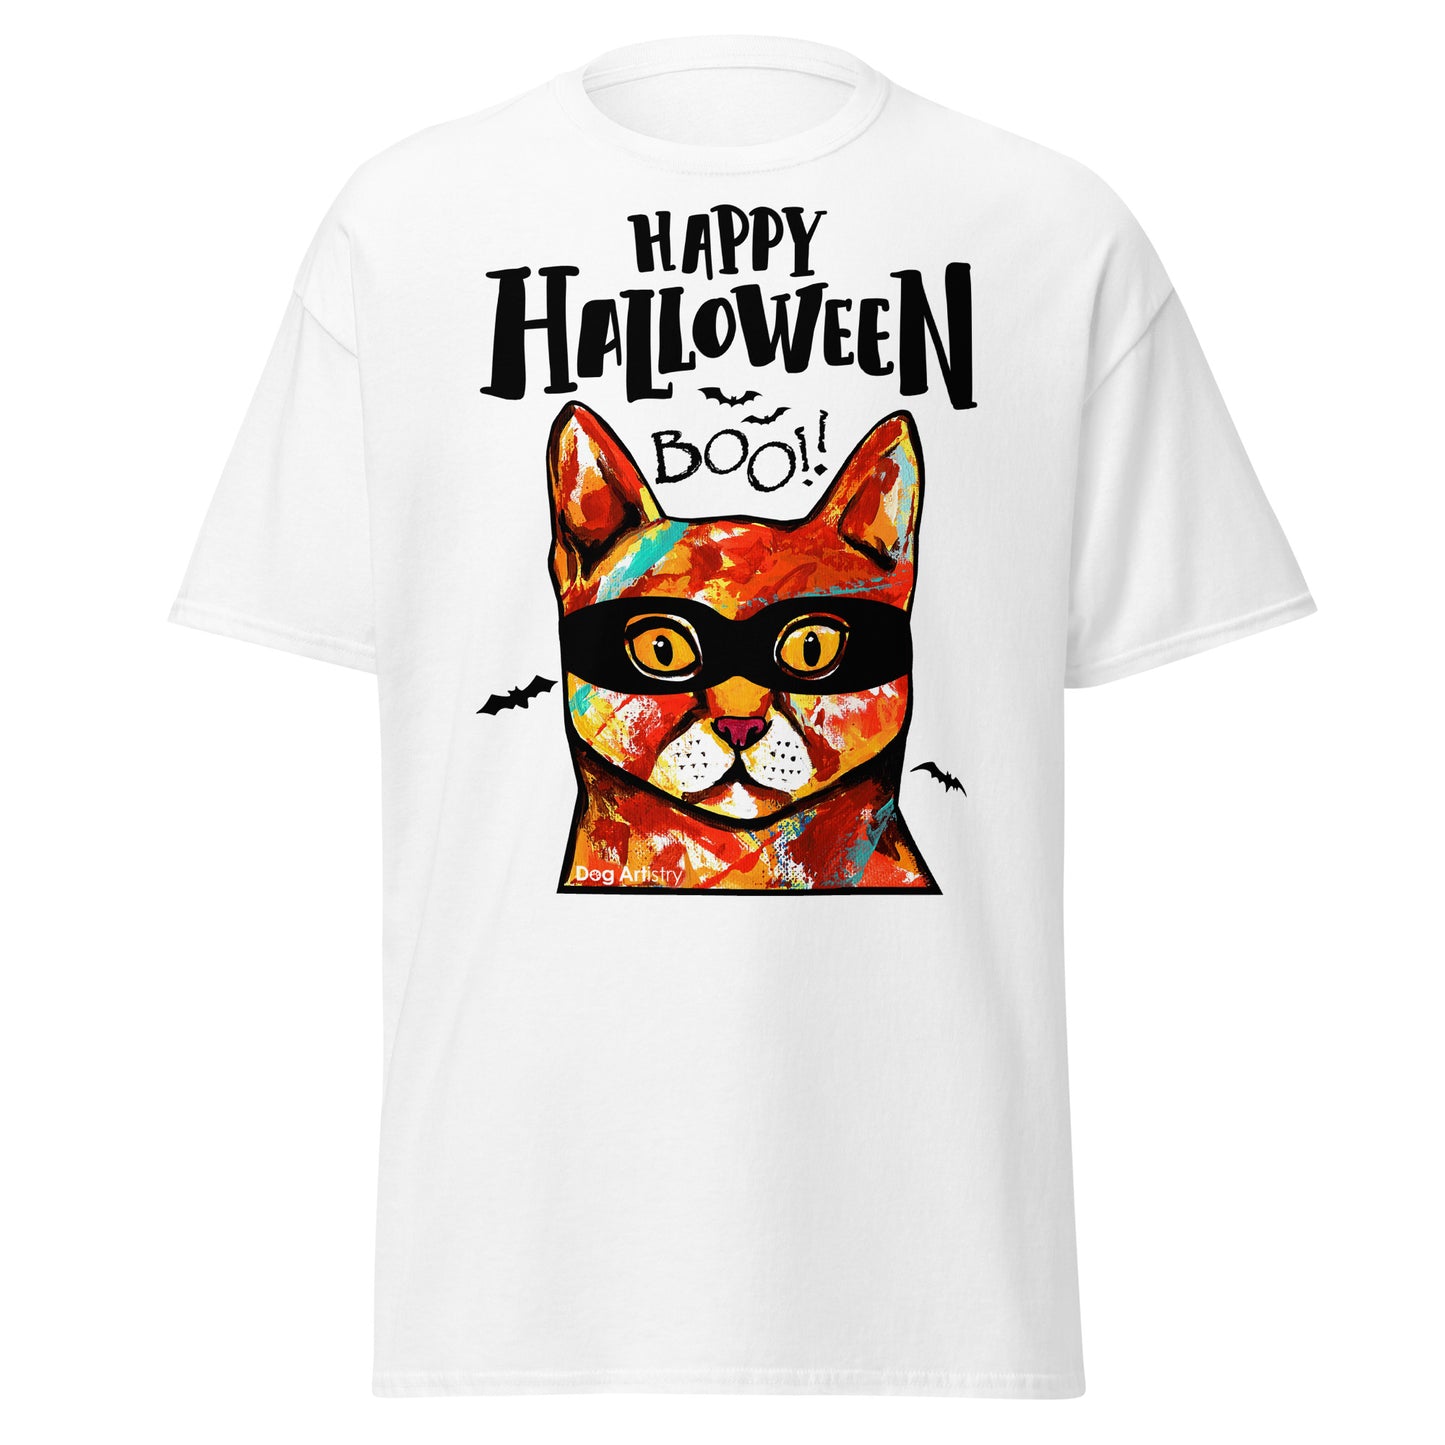 Funny Happy Halloween Cat wearing mask men’s white t-shirt by Dog Artistry.